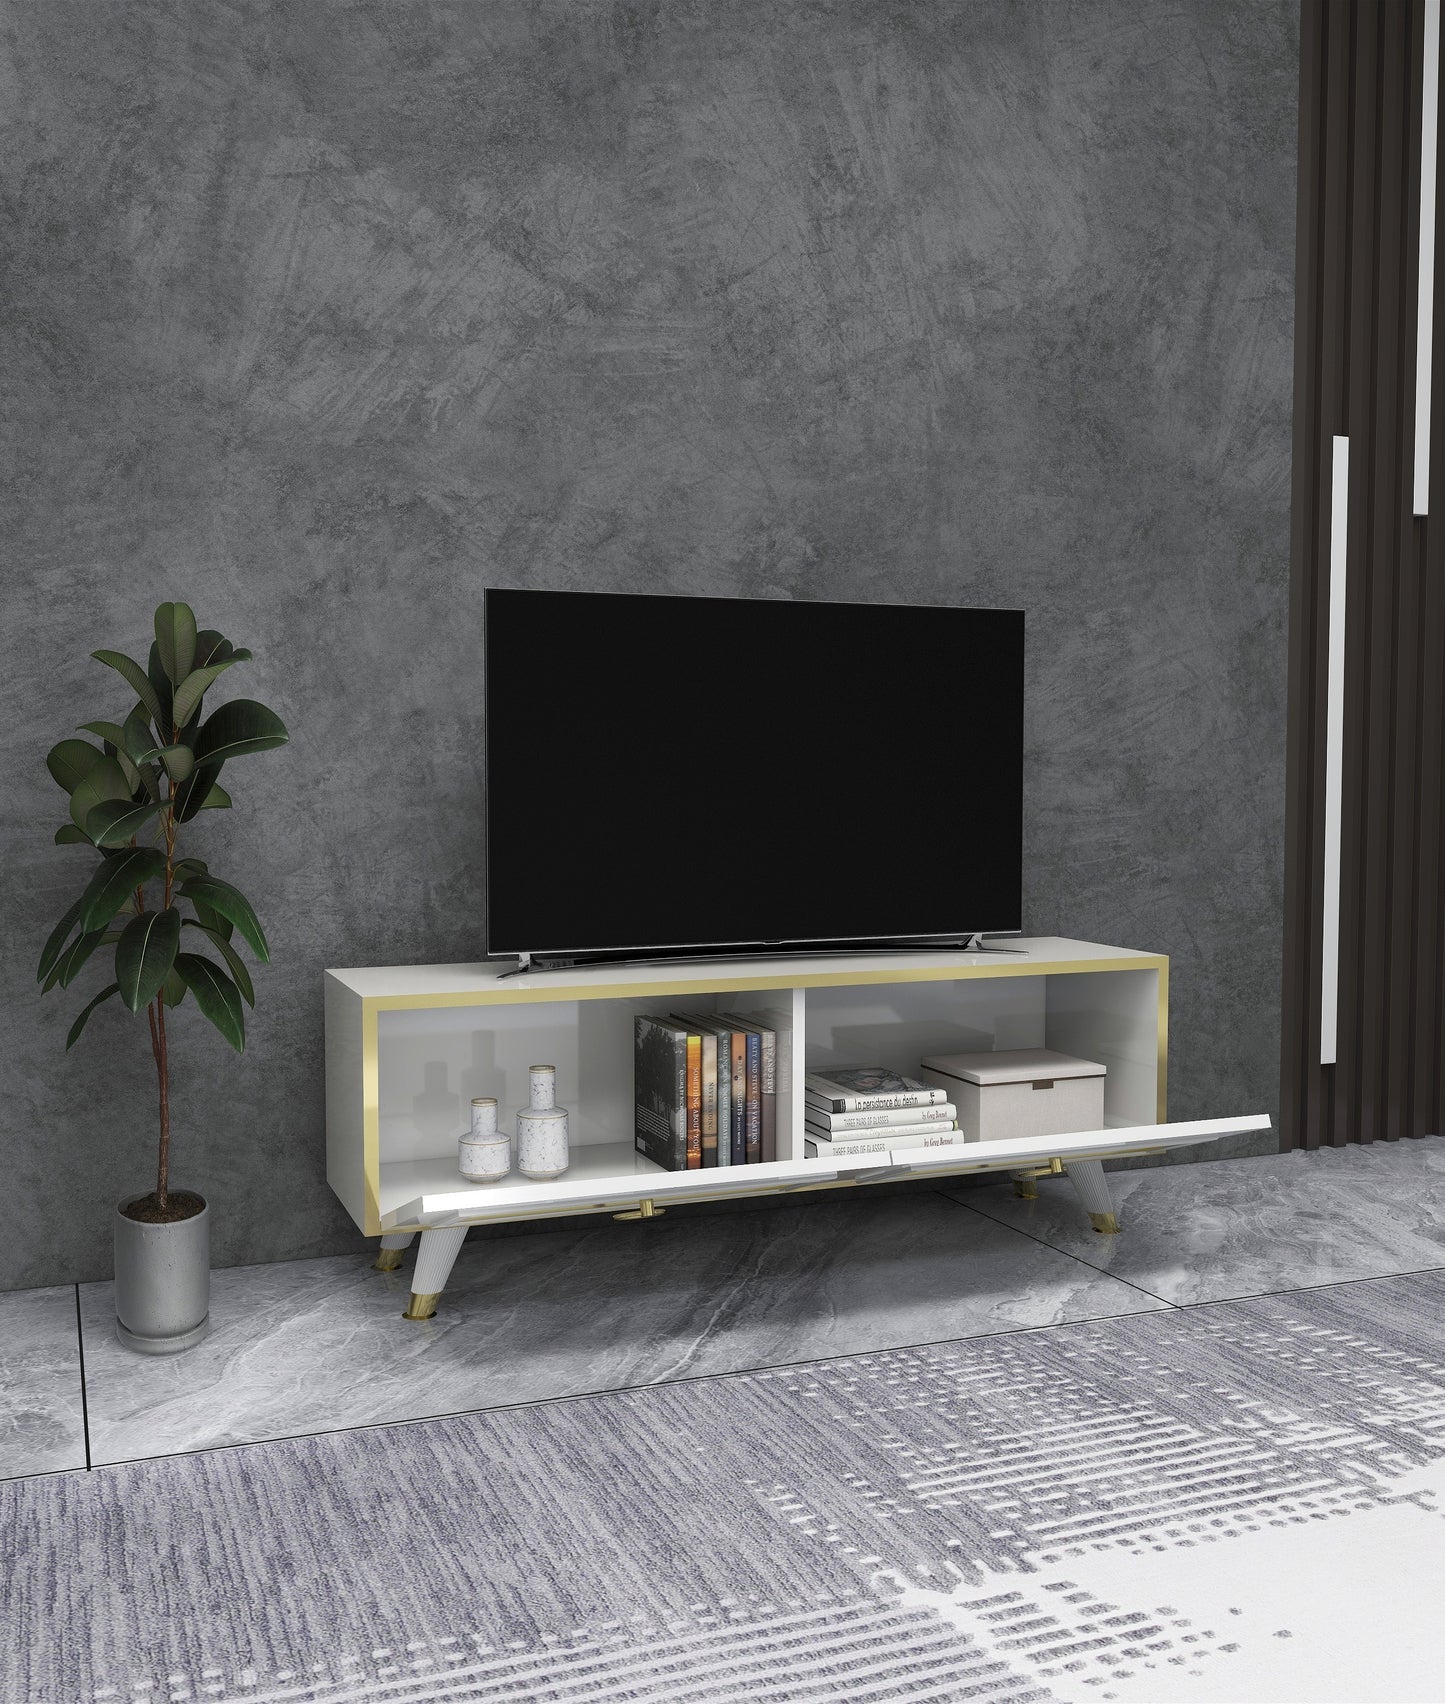 TV Stand, Media Console, TV cabinet, Wooden TV Stand, Media Stand, TV Lowboard, Entertainment Center, Wood TV Unit, TV Board, TV Table, Media Center, Living Room, Furniture